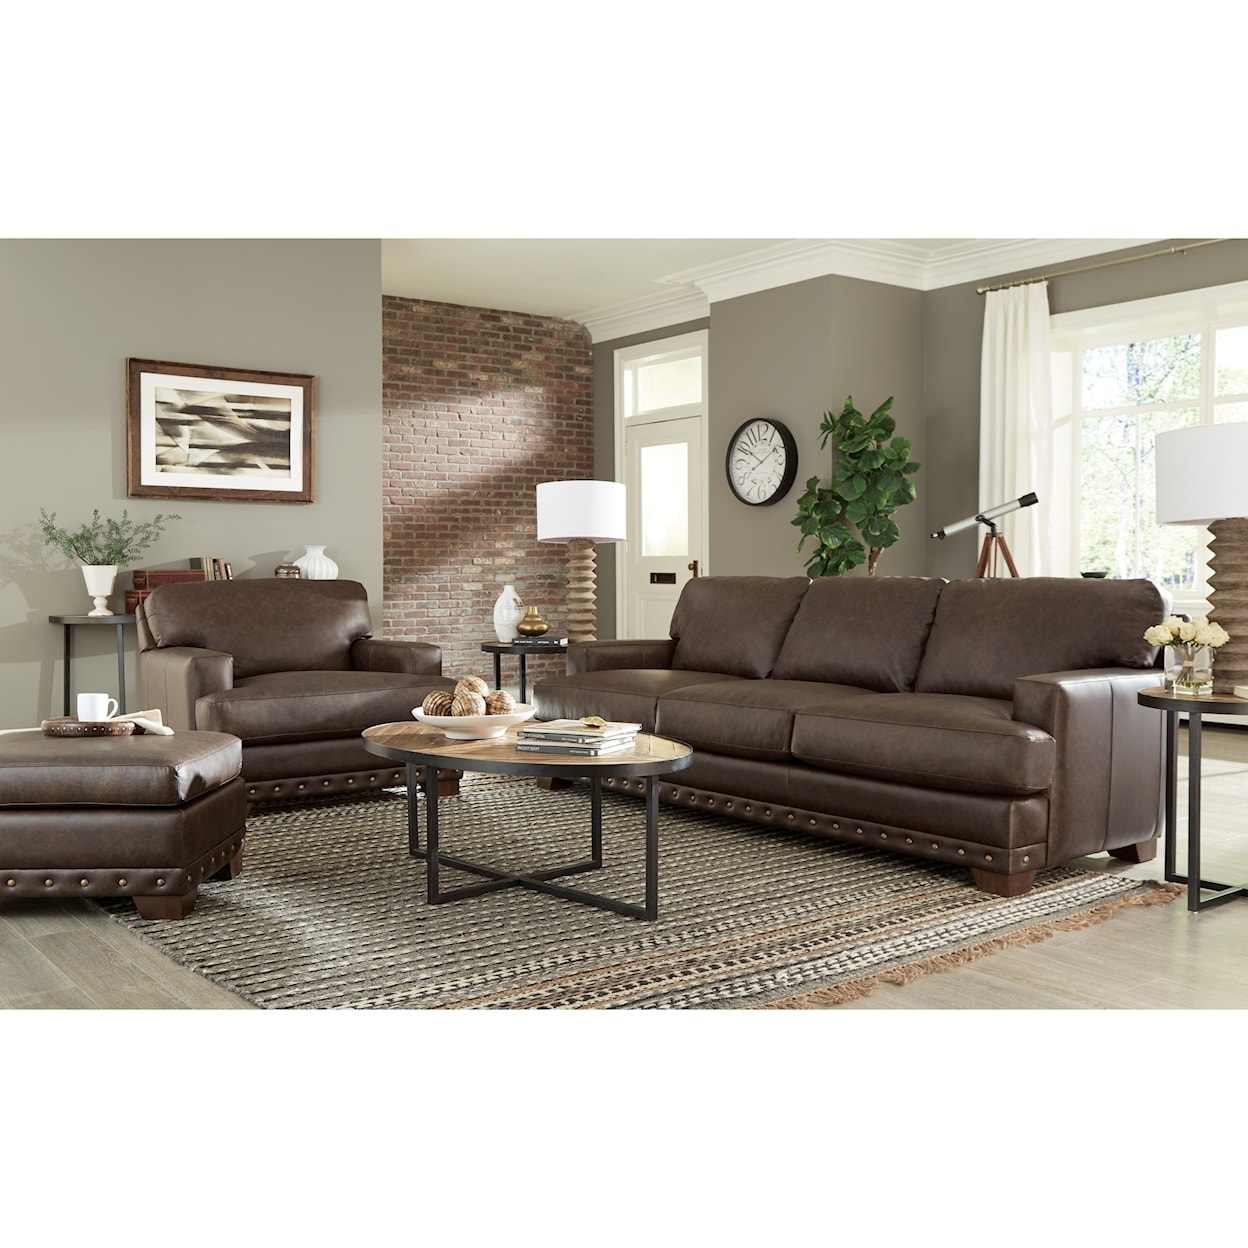 Hickory Craft L782750 Living Room Group